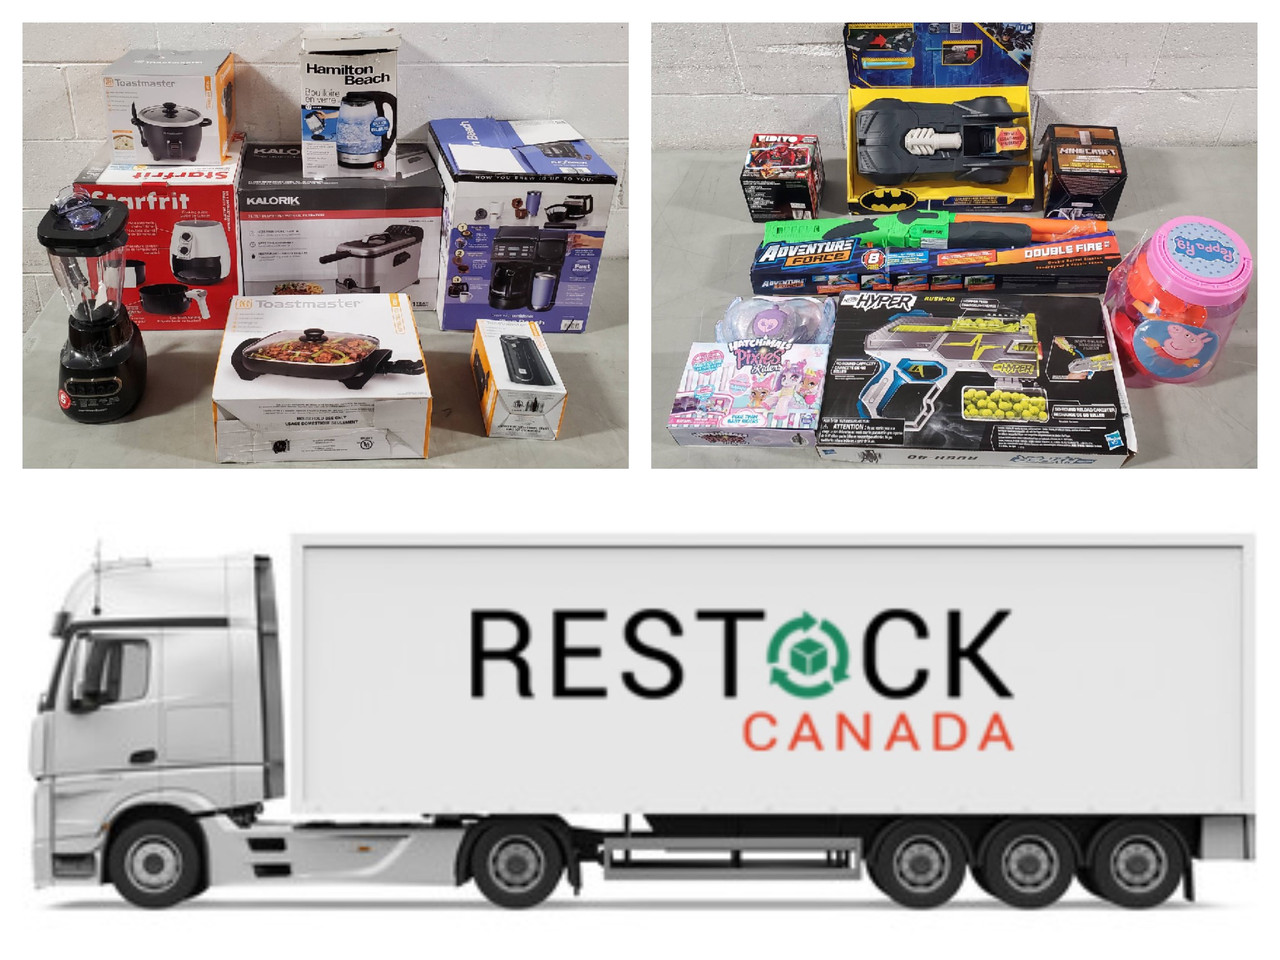 6459 Units of Home, Fashion & More - MSRP $104,475 - Returns (Lot #  TK635401) - Restock Canada